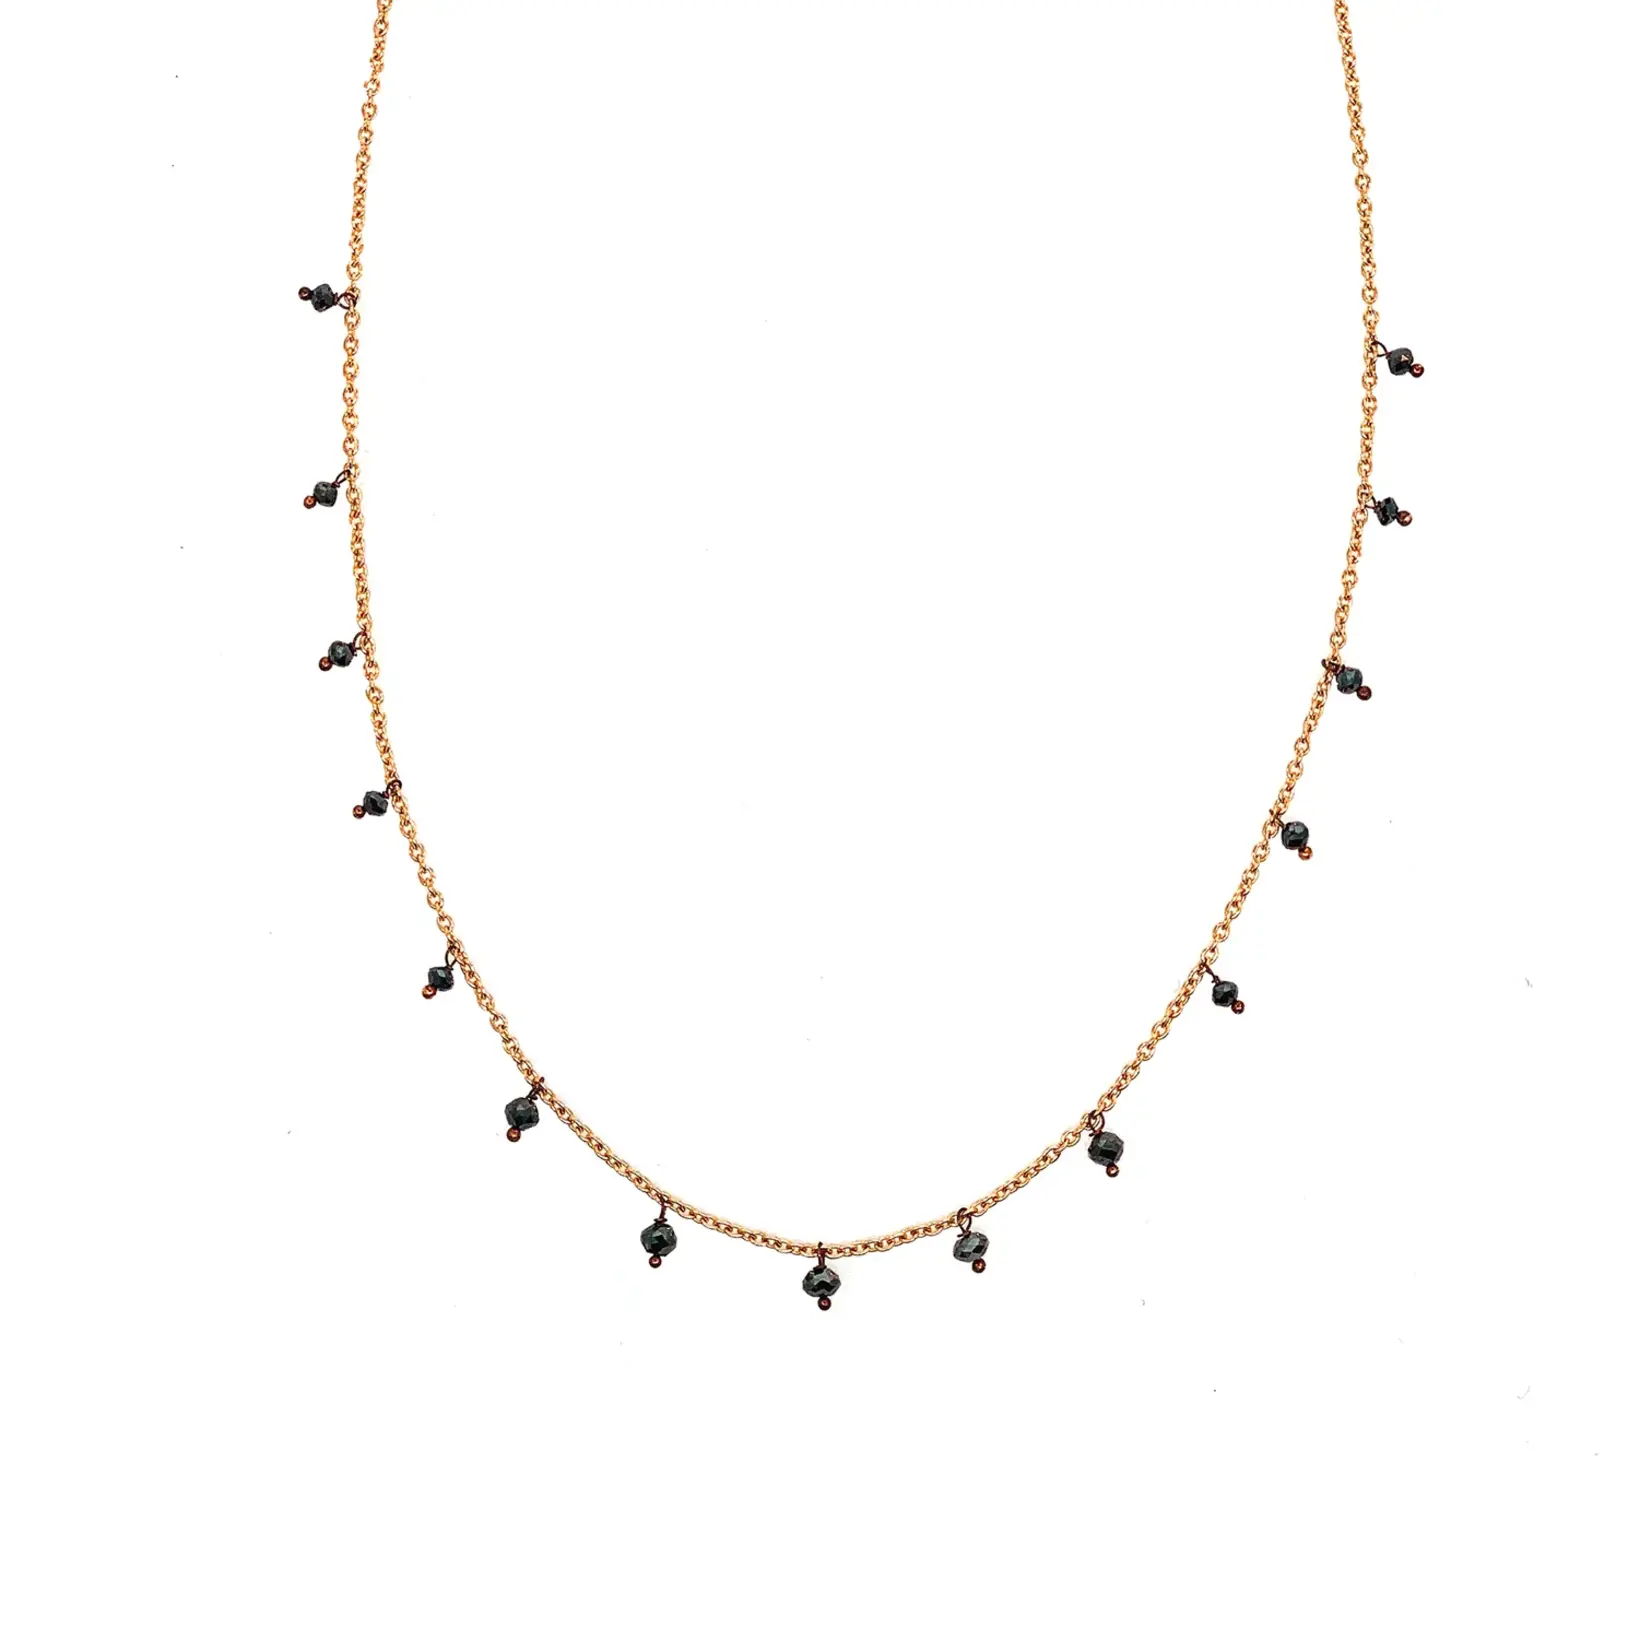 Sethi Couture Rose Gold and Black Diamond Bead Adeline Necklace